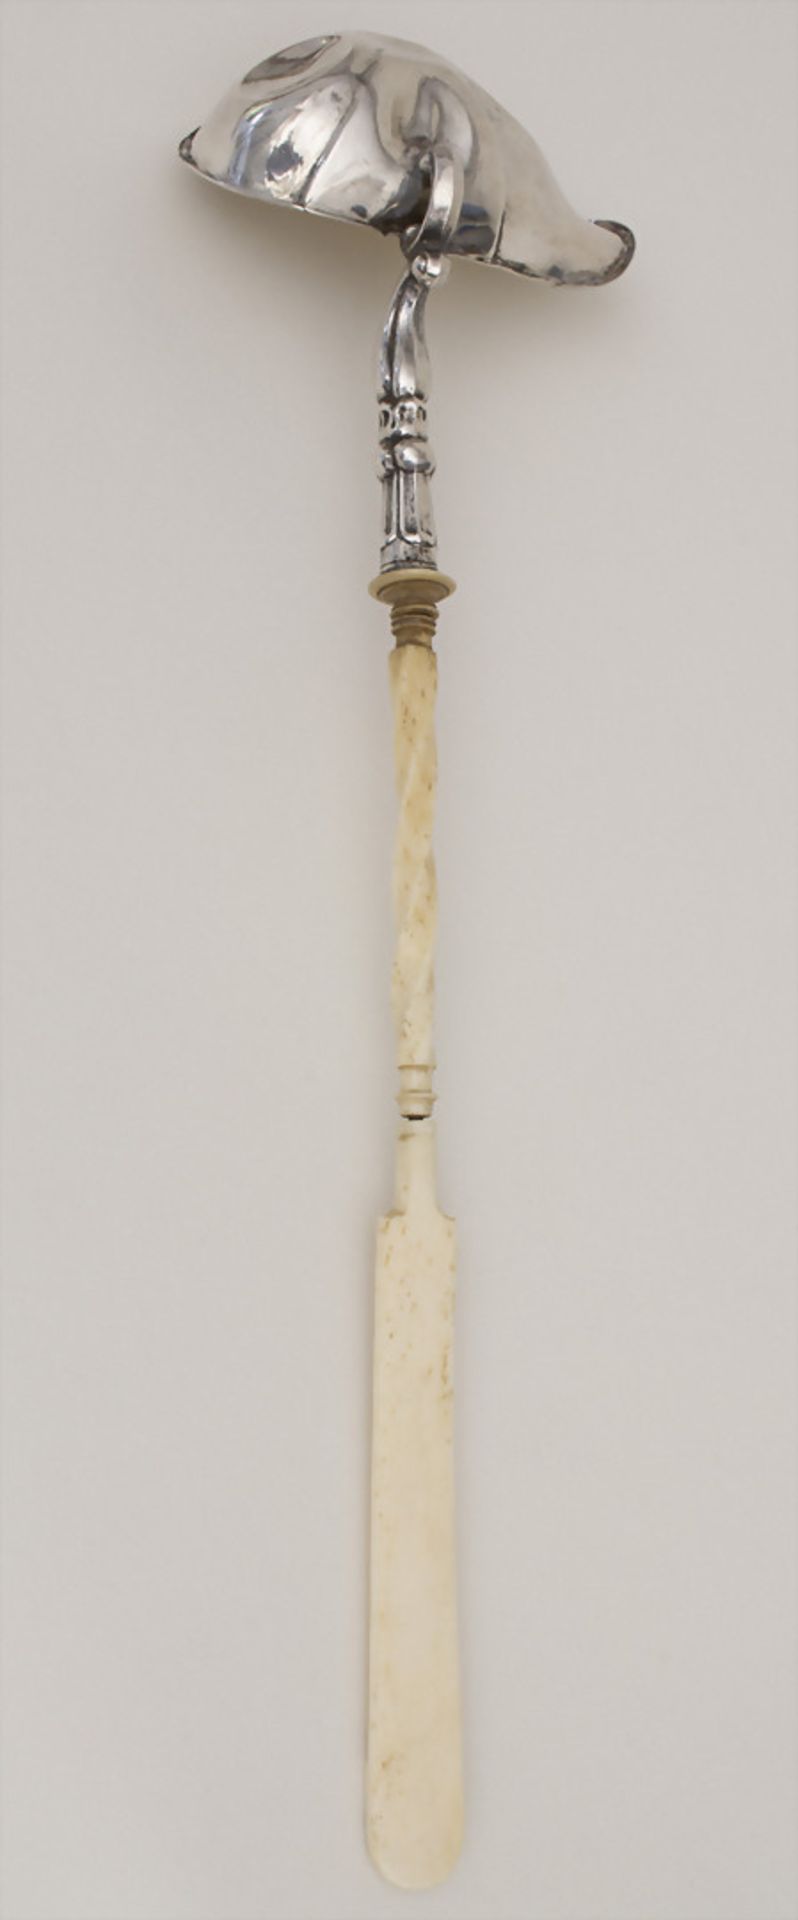 Punschkelle mit Beingriff / A silver punch ladle with bone handle, um 1800Material: Silber, Laffe - Image 2 of 2